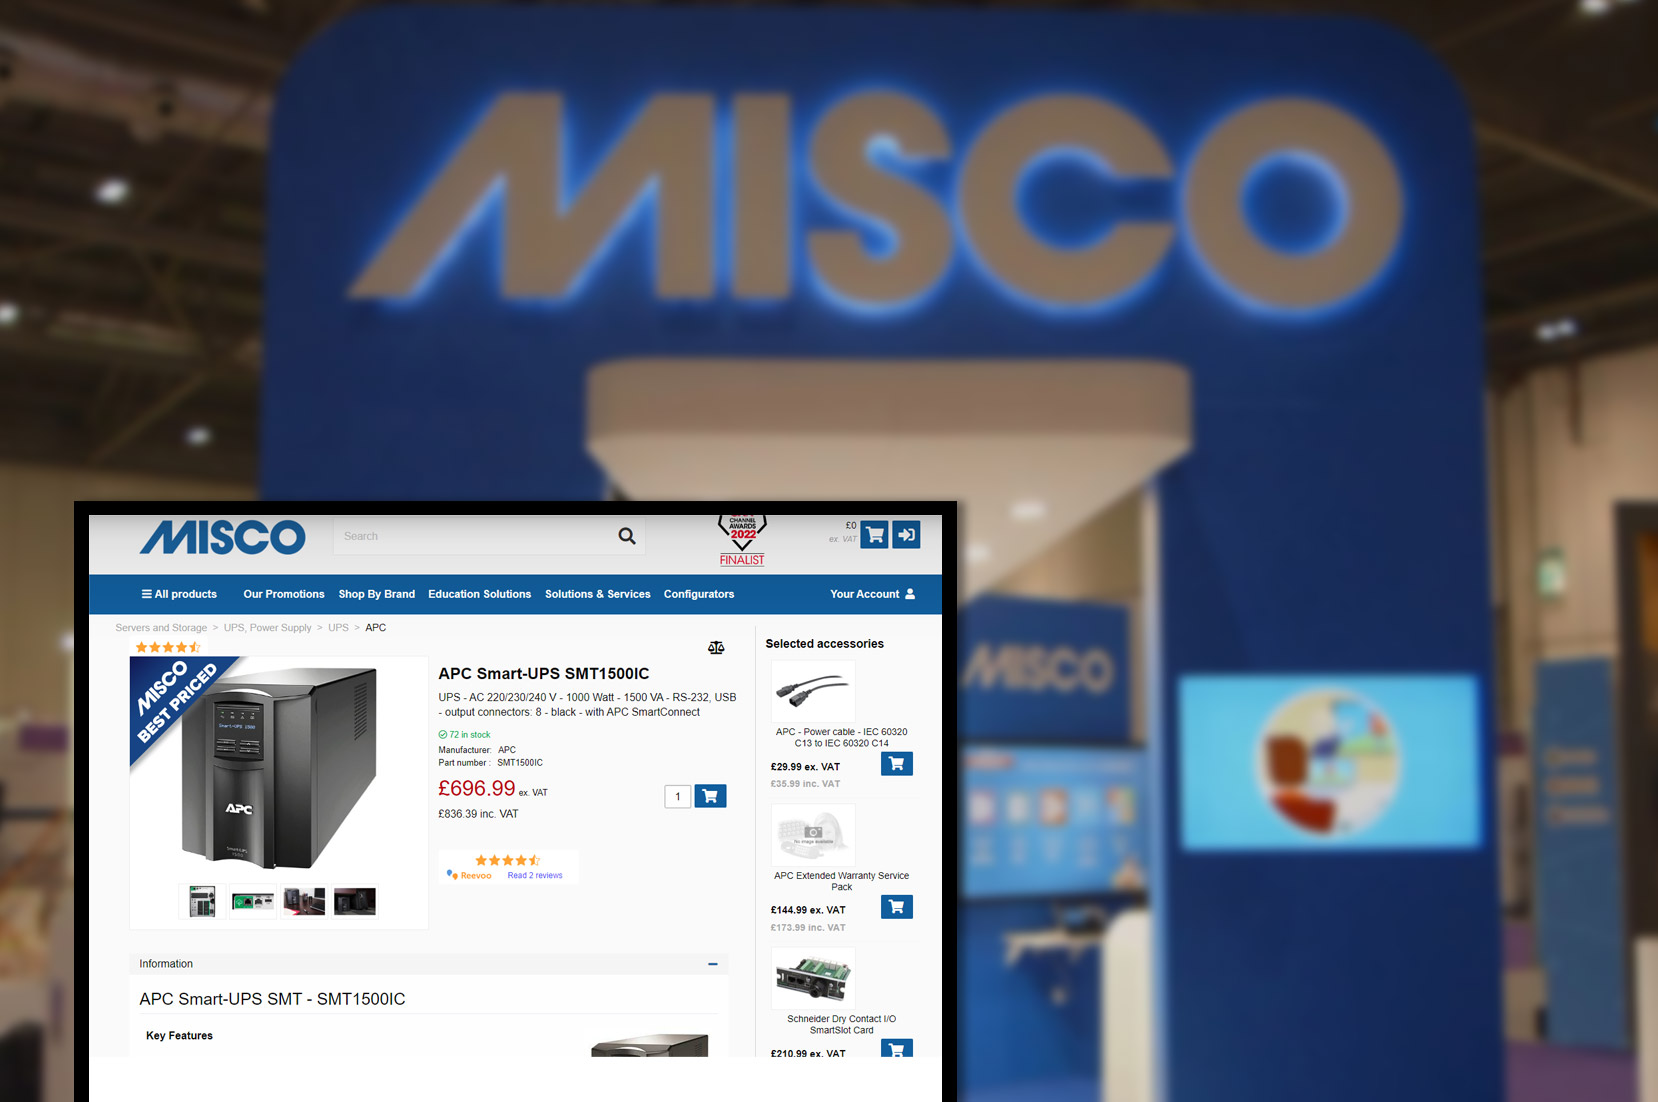 misco-co-ukproduct-pricing-information-and-image-scraping-services